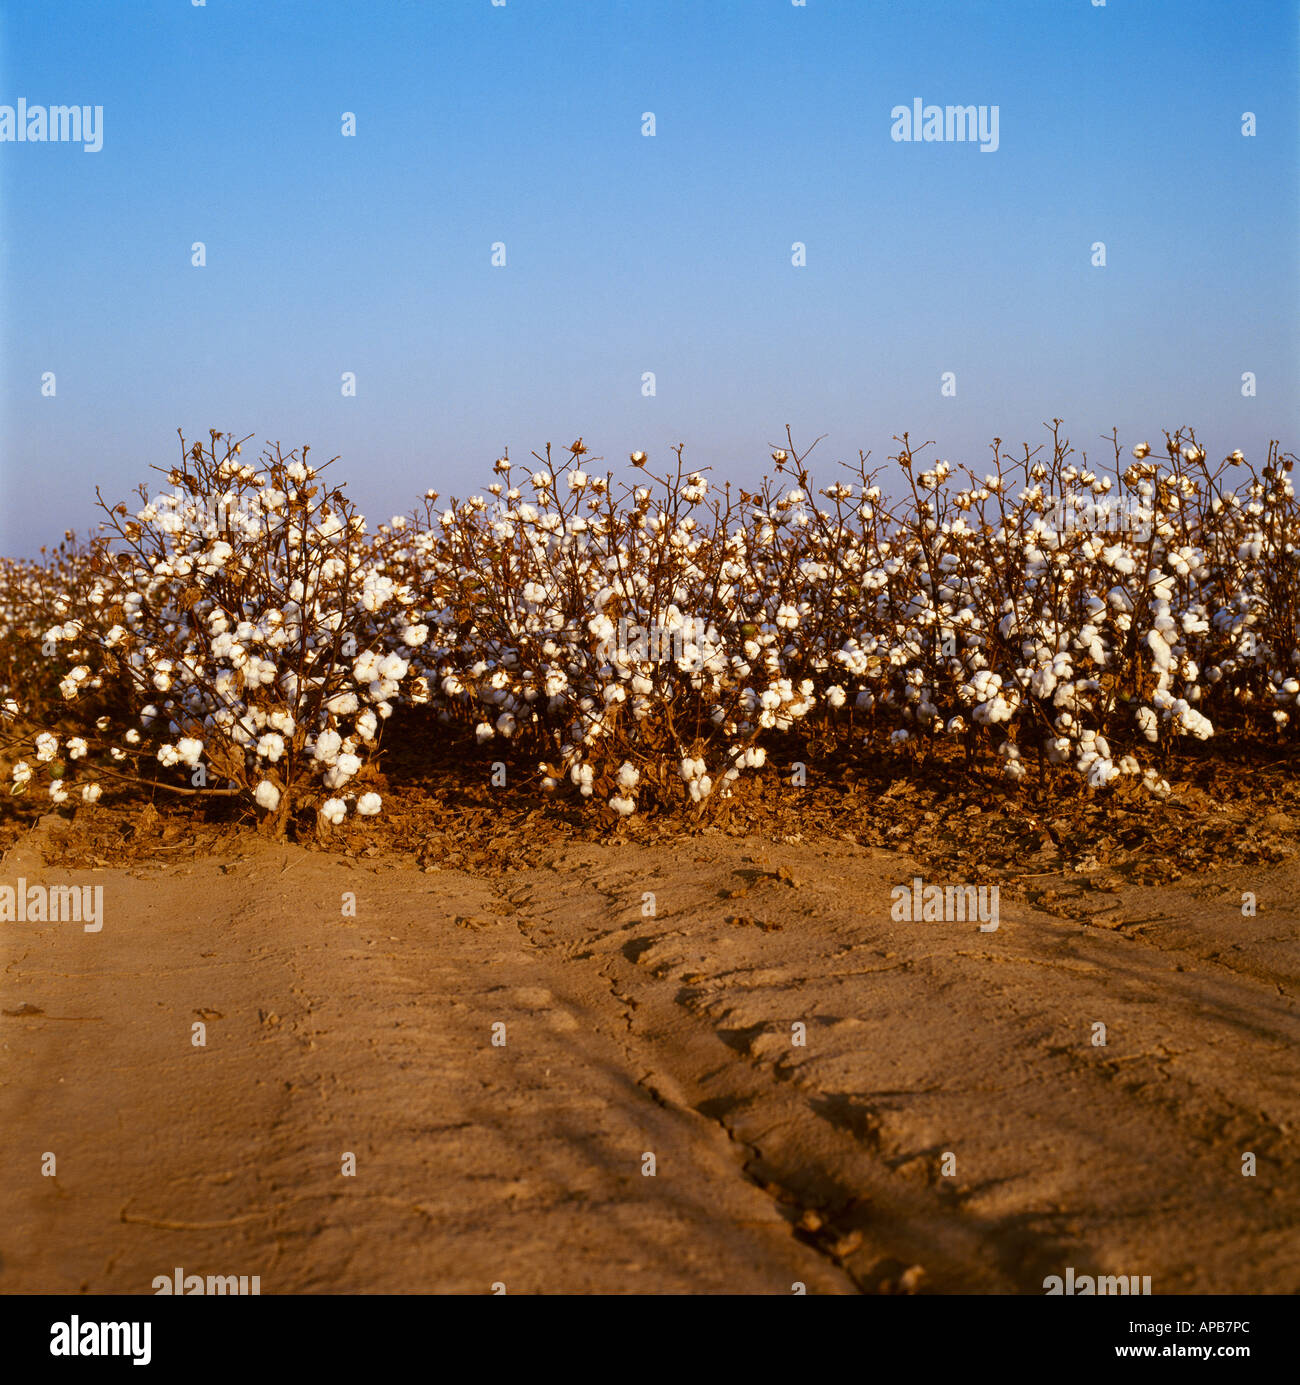 Agriculture - Row ends of mature defoliated cotton ready for harvest / Mississippi, USA. Stock Photo